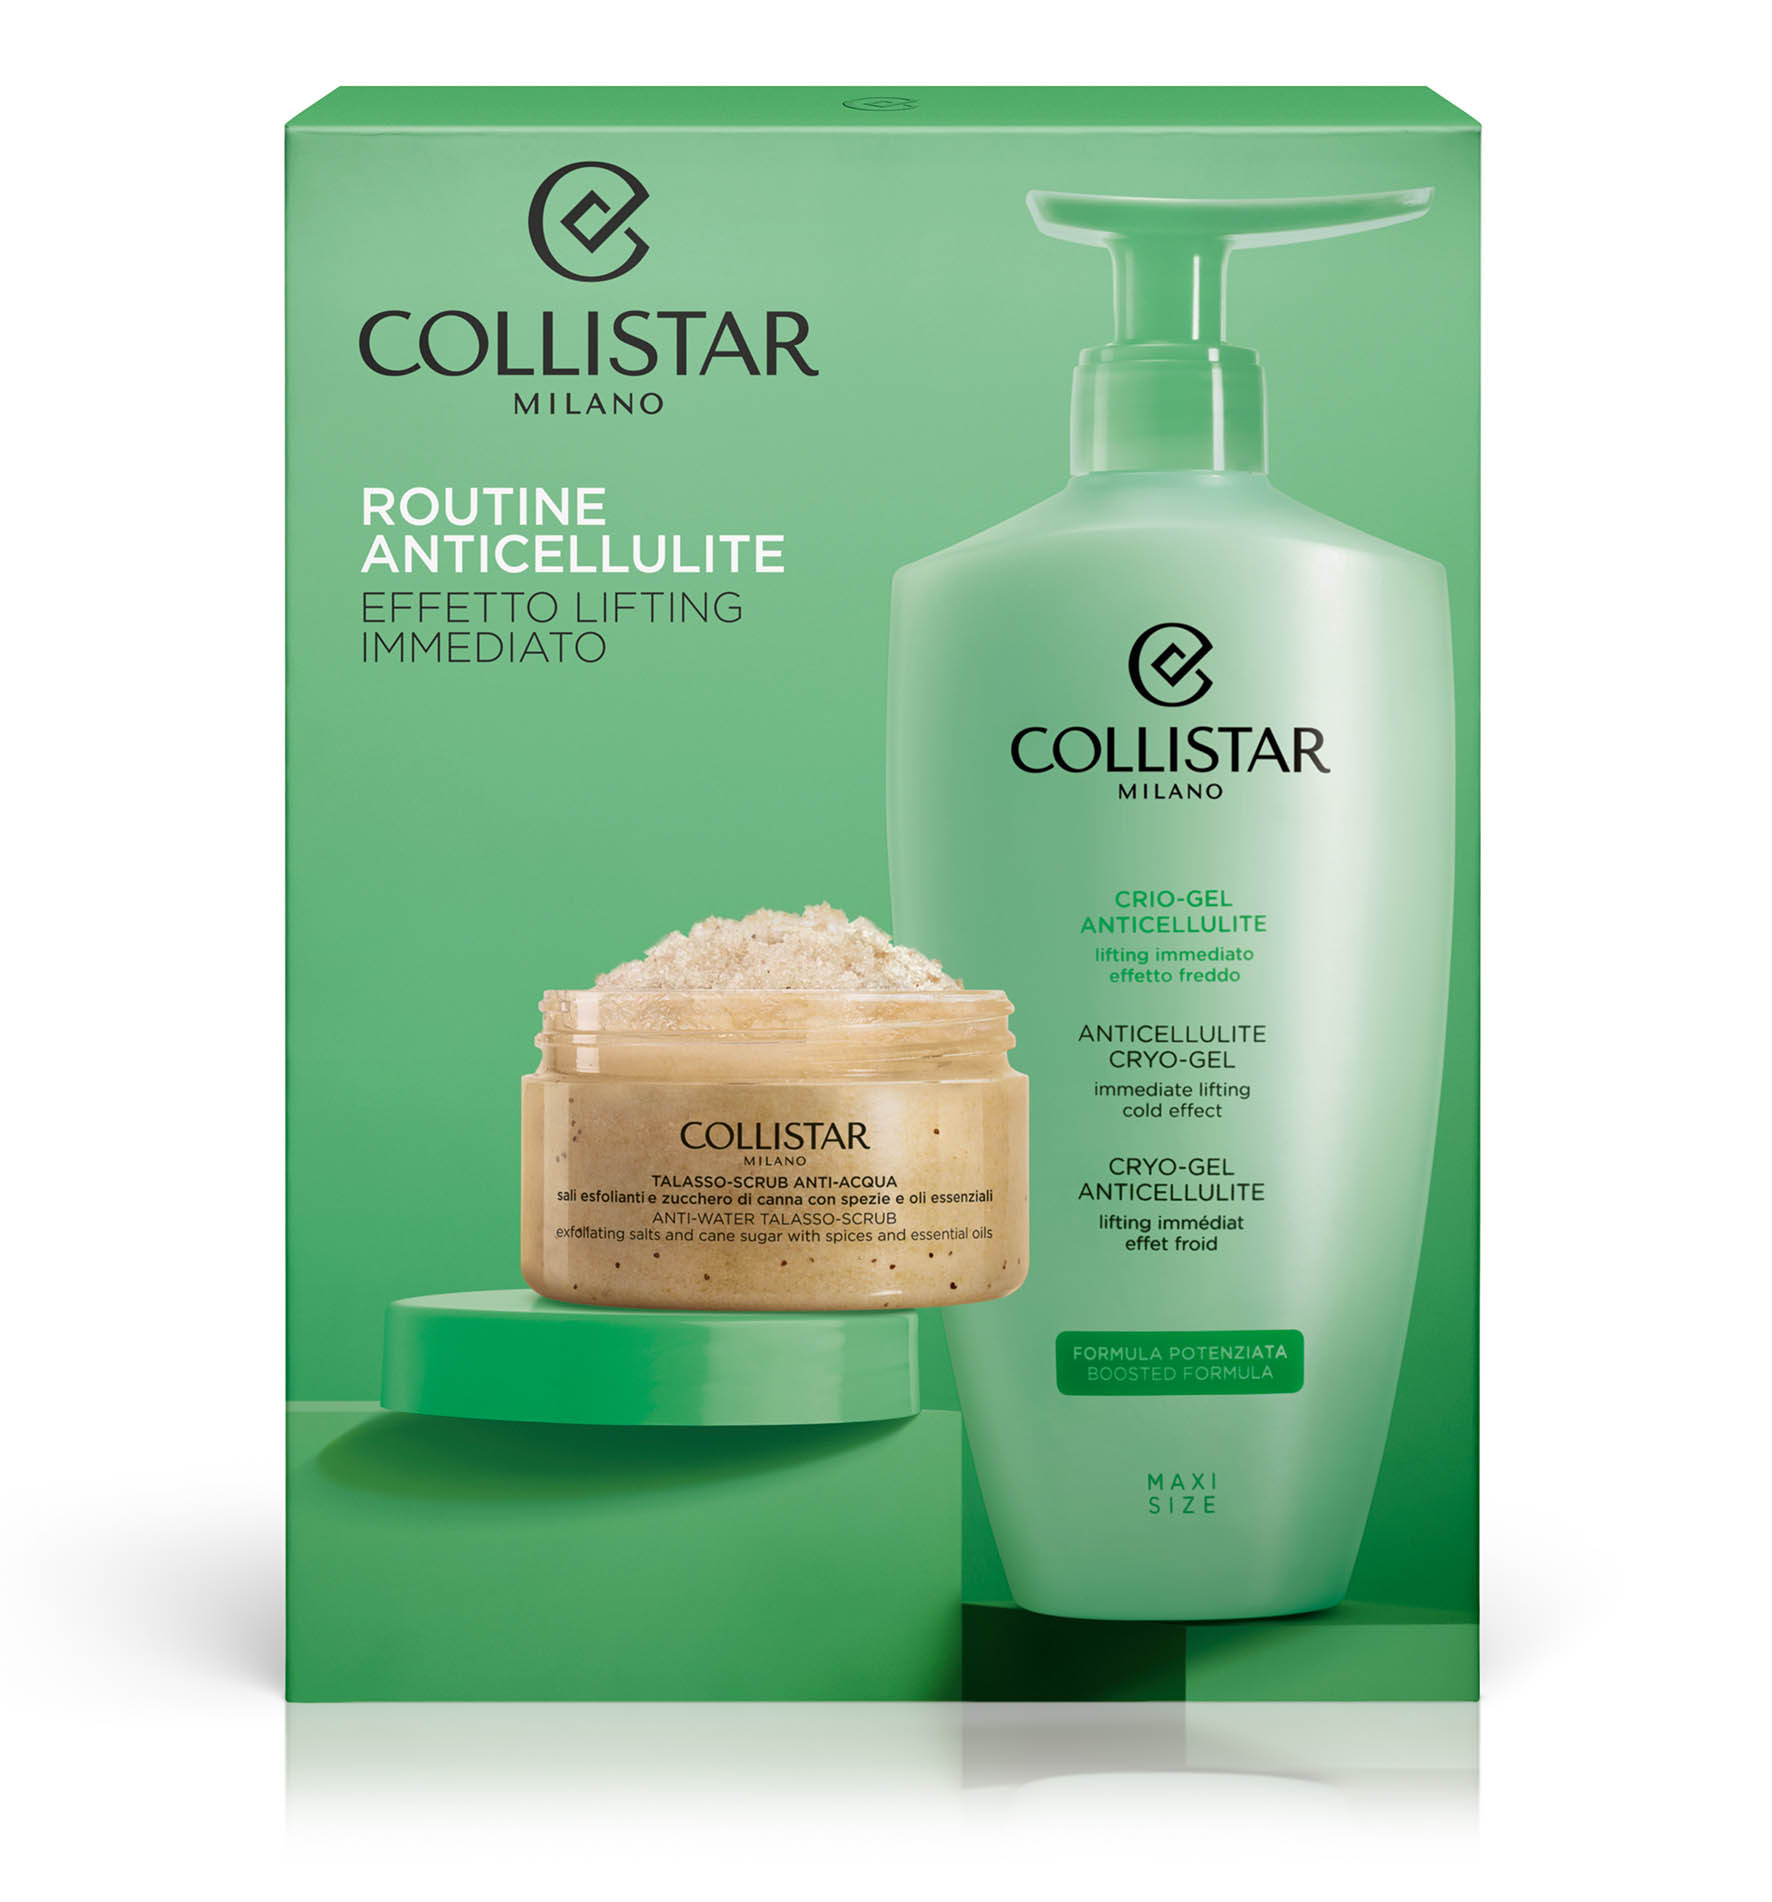 ANTICELLULITE ROUTINE IMMEDIATE LIFTING EFFECT - Speciale Aanbieding | Collistar - Shop Online Ufficiale